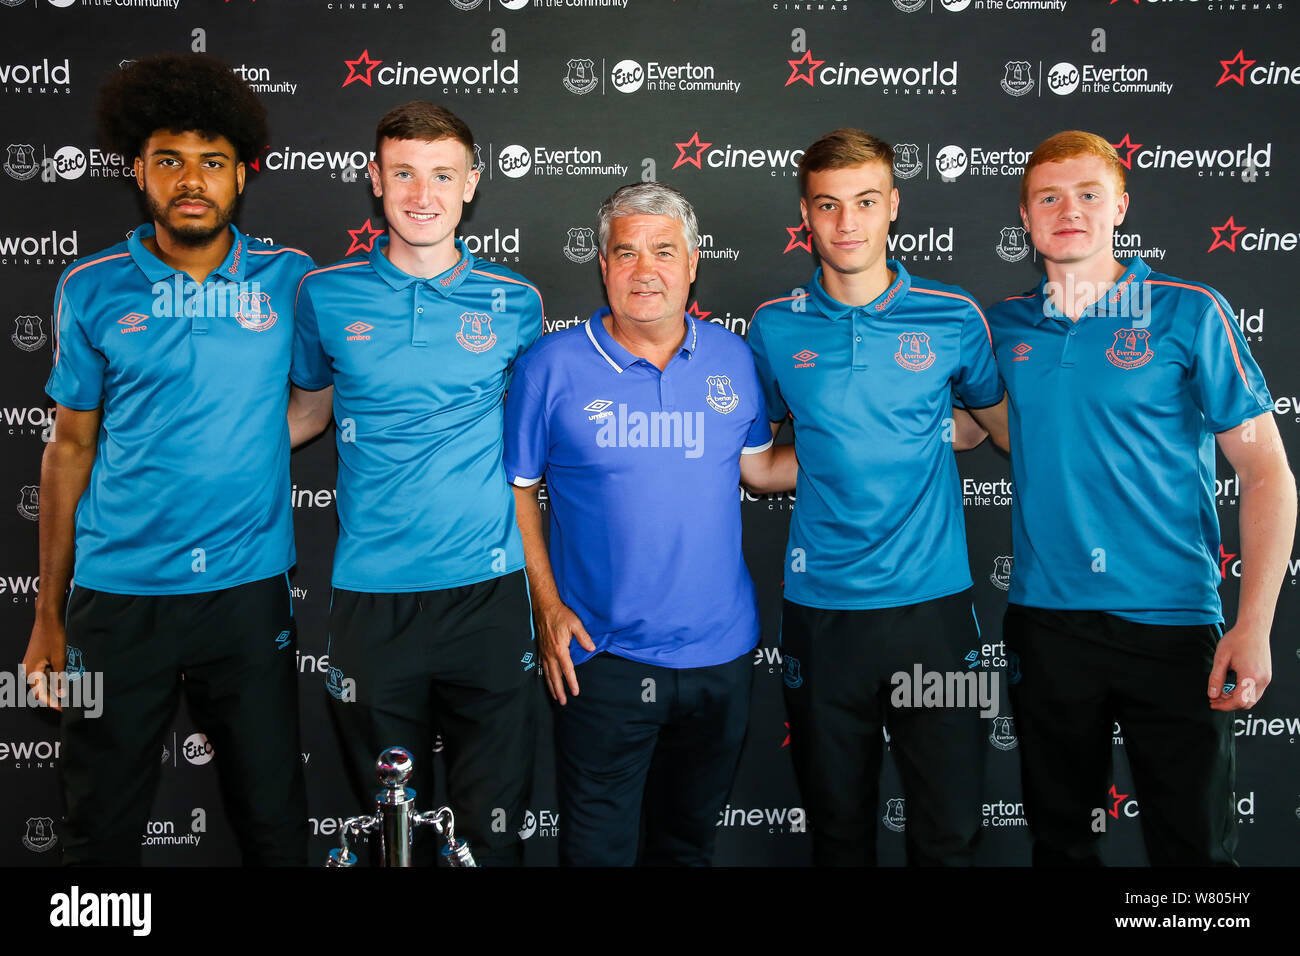 Everton U23 players (L-R) Ellis Simms, Joe Anderson, club ambassador Ian Snodin, Ryan Astley and captain Morgan Feeney pose for a picture during the Cineworld Speke Anniversary and Everton in the Community Screening in Liverpool. Stock Photo